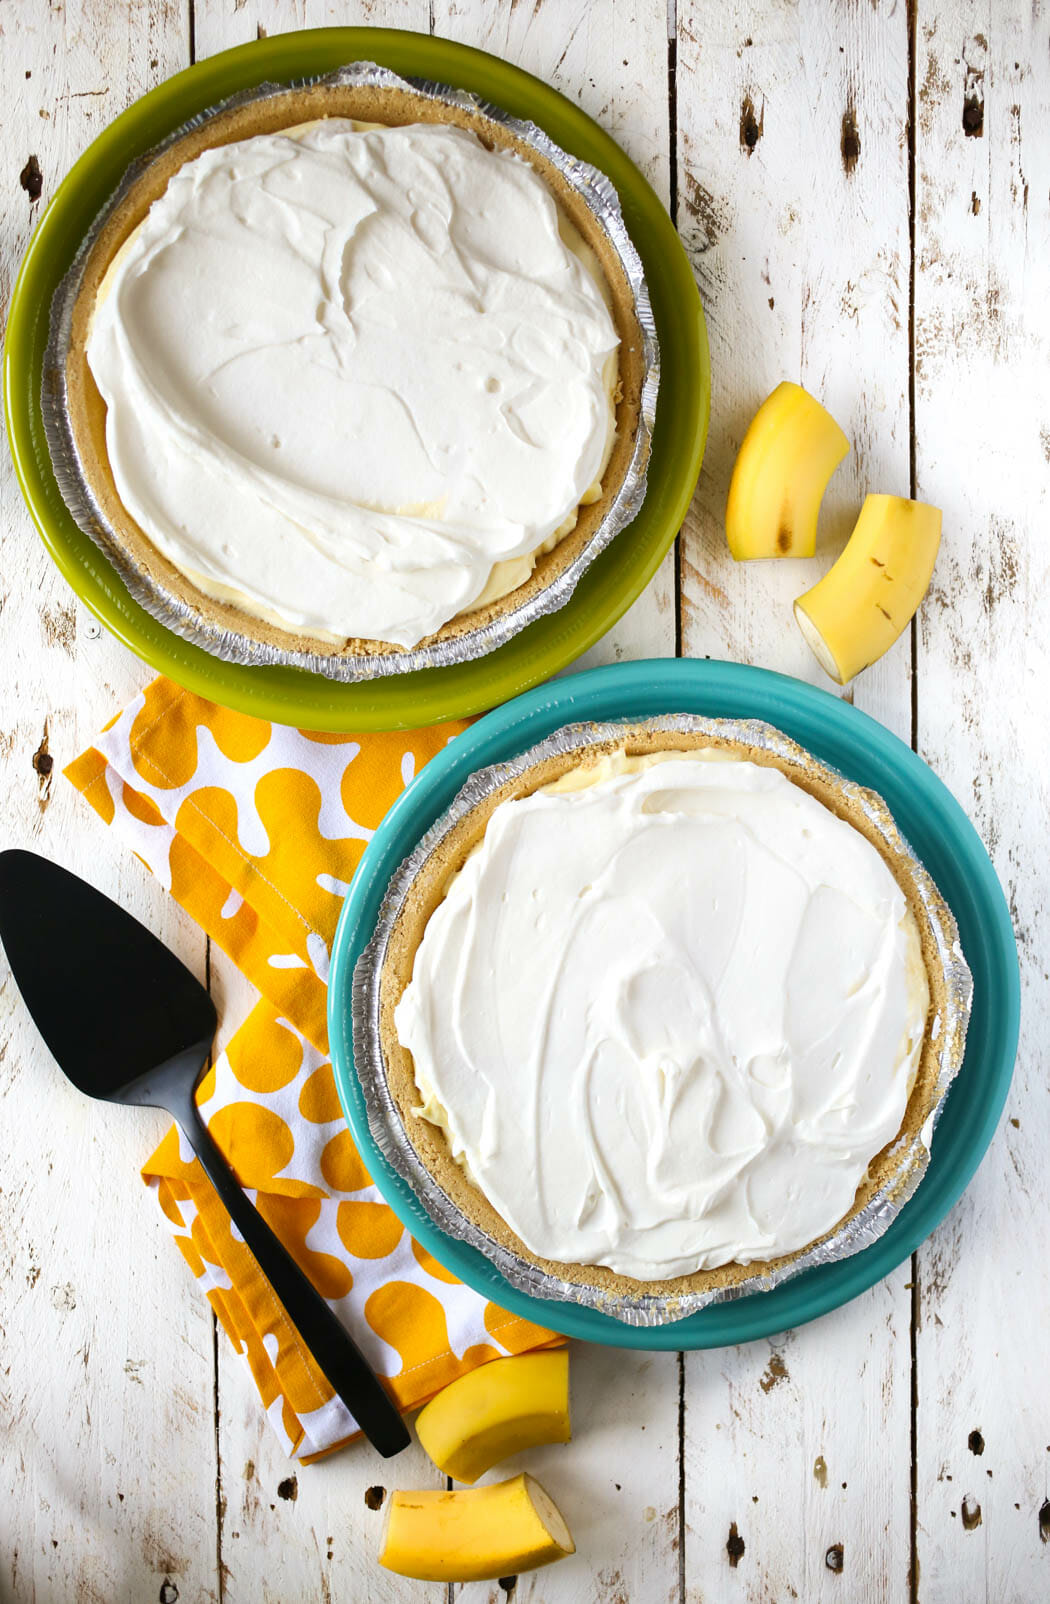 easiest best banana cream pie from Our Best Bites